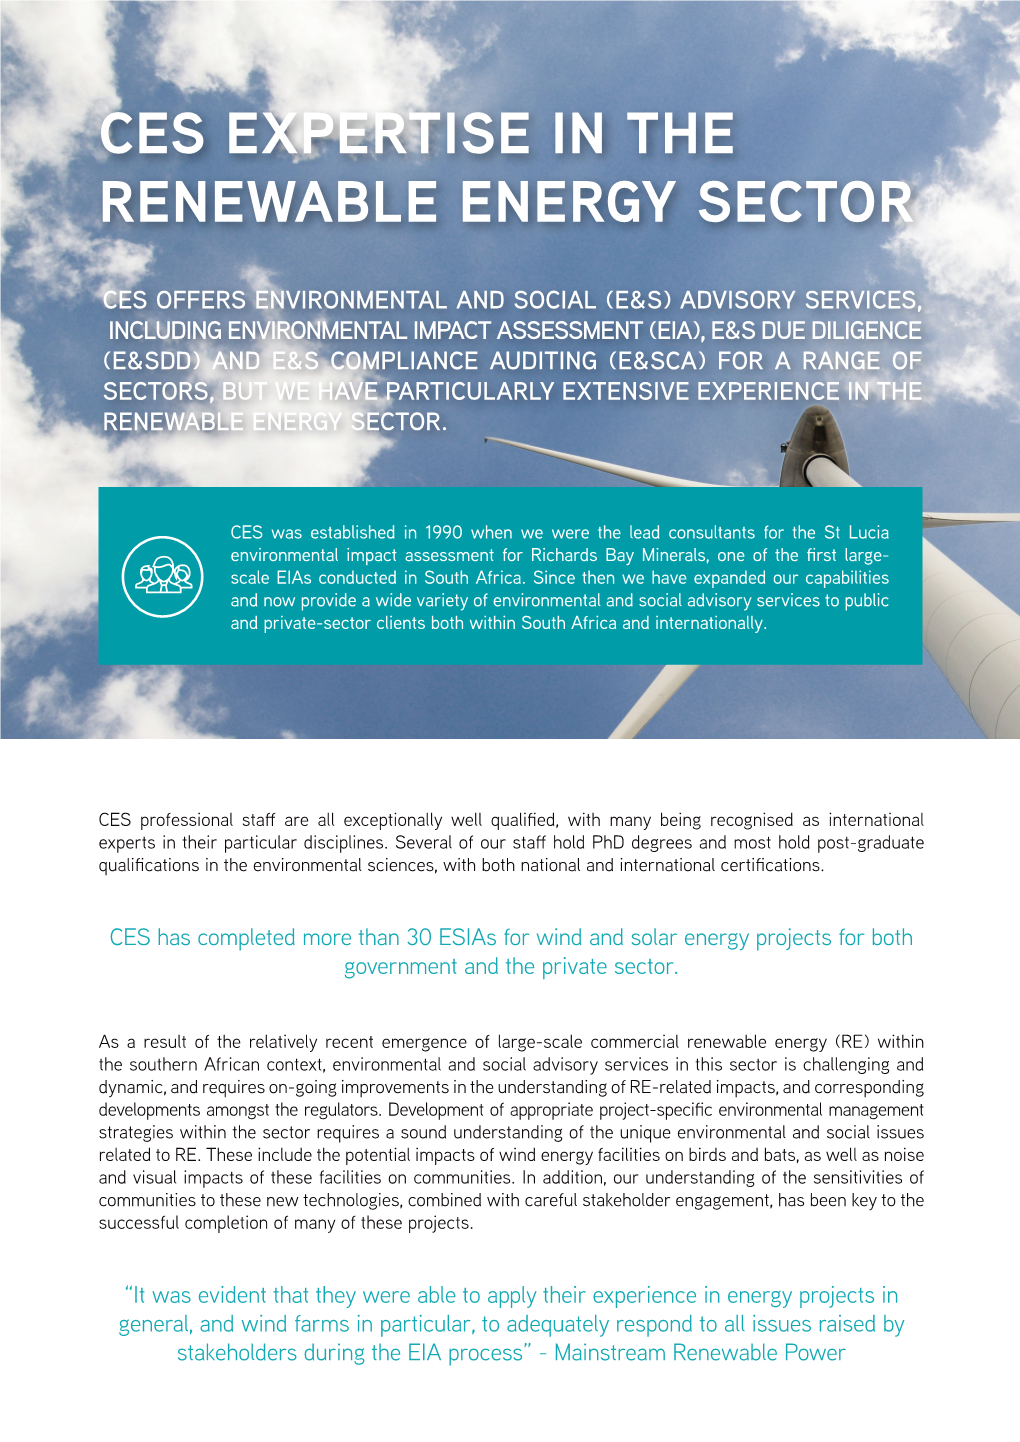 Expertise in Renewable Energy Sector